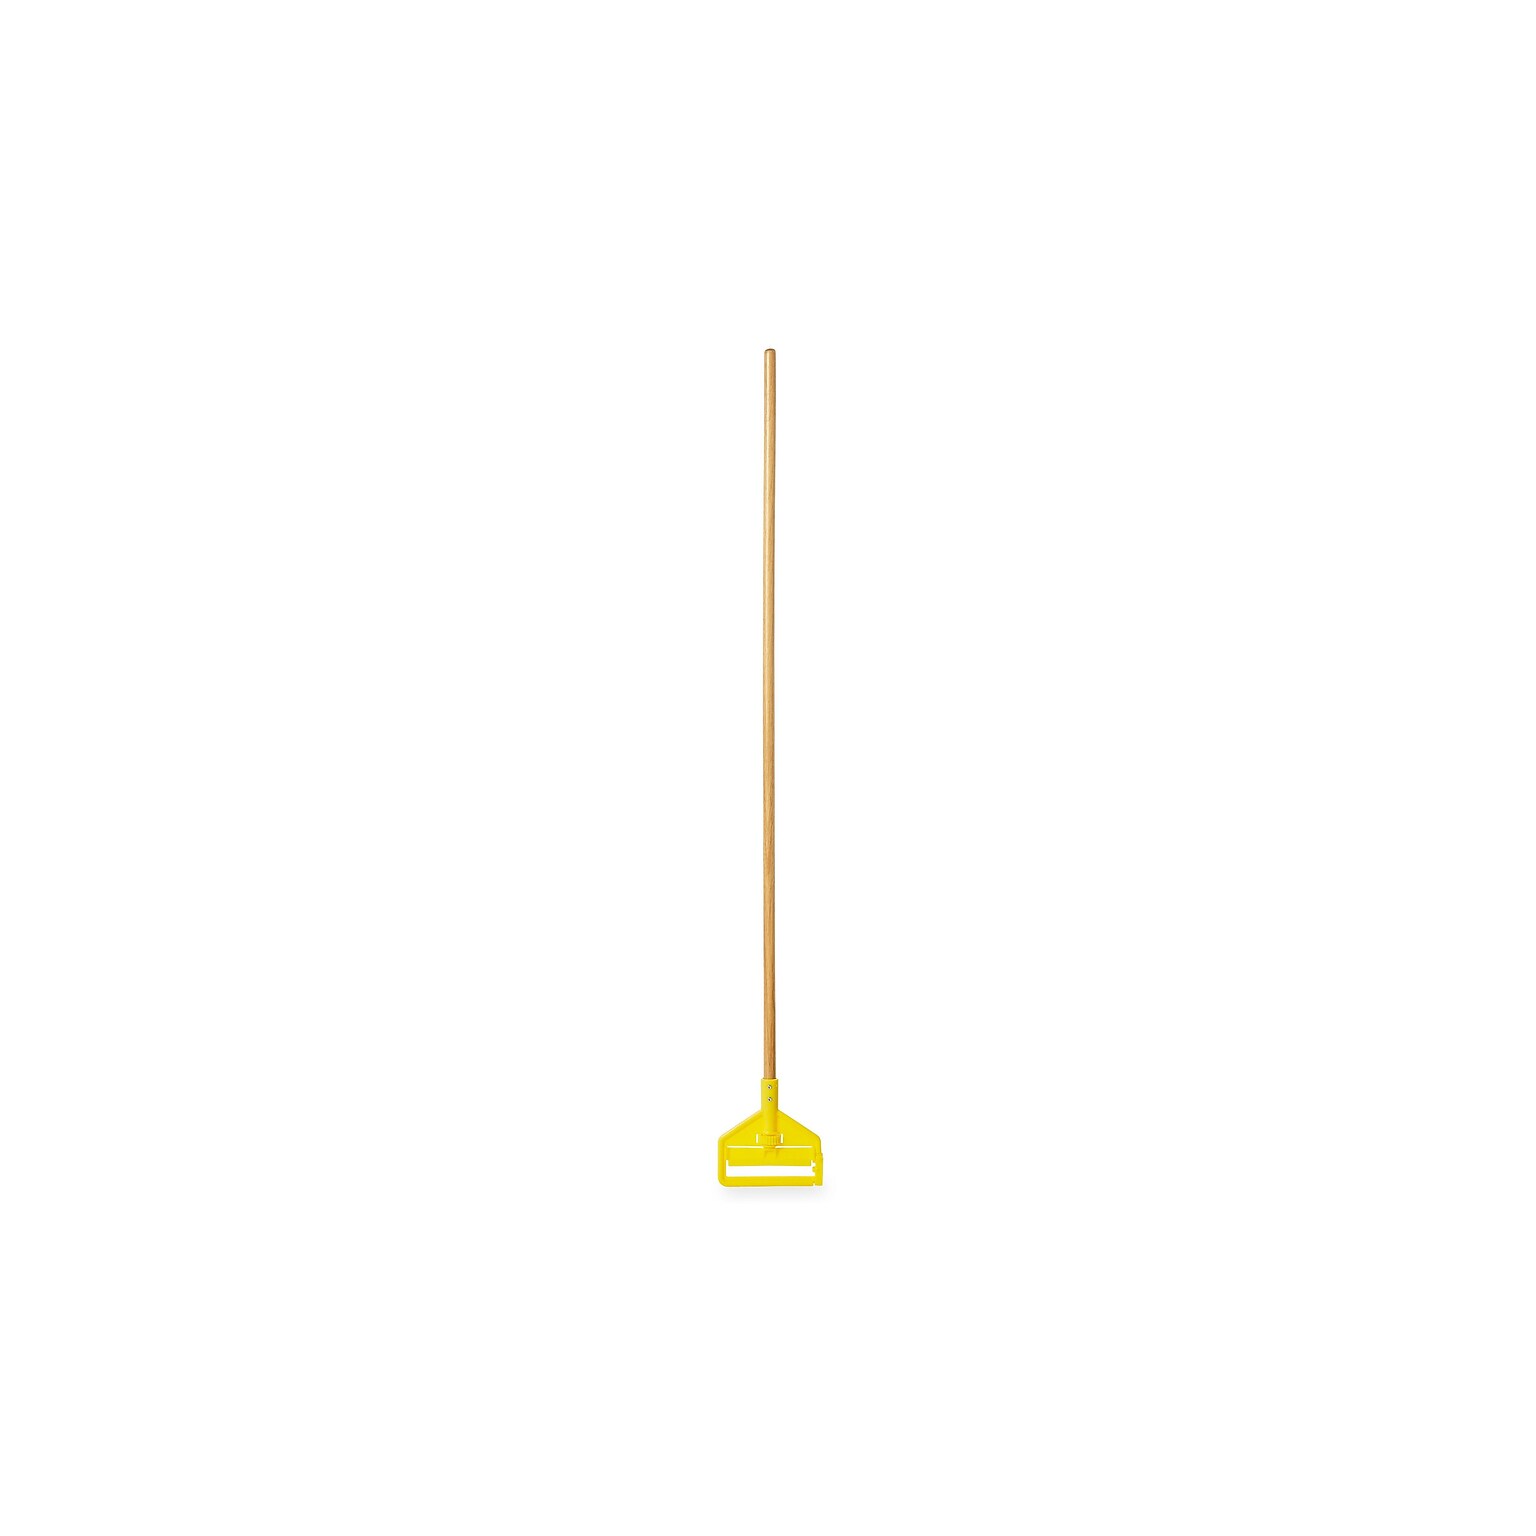 Rubbermaid Invader 60 Wood Wet Mop Handle, Yellow/Natural (FGH116000000)